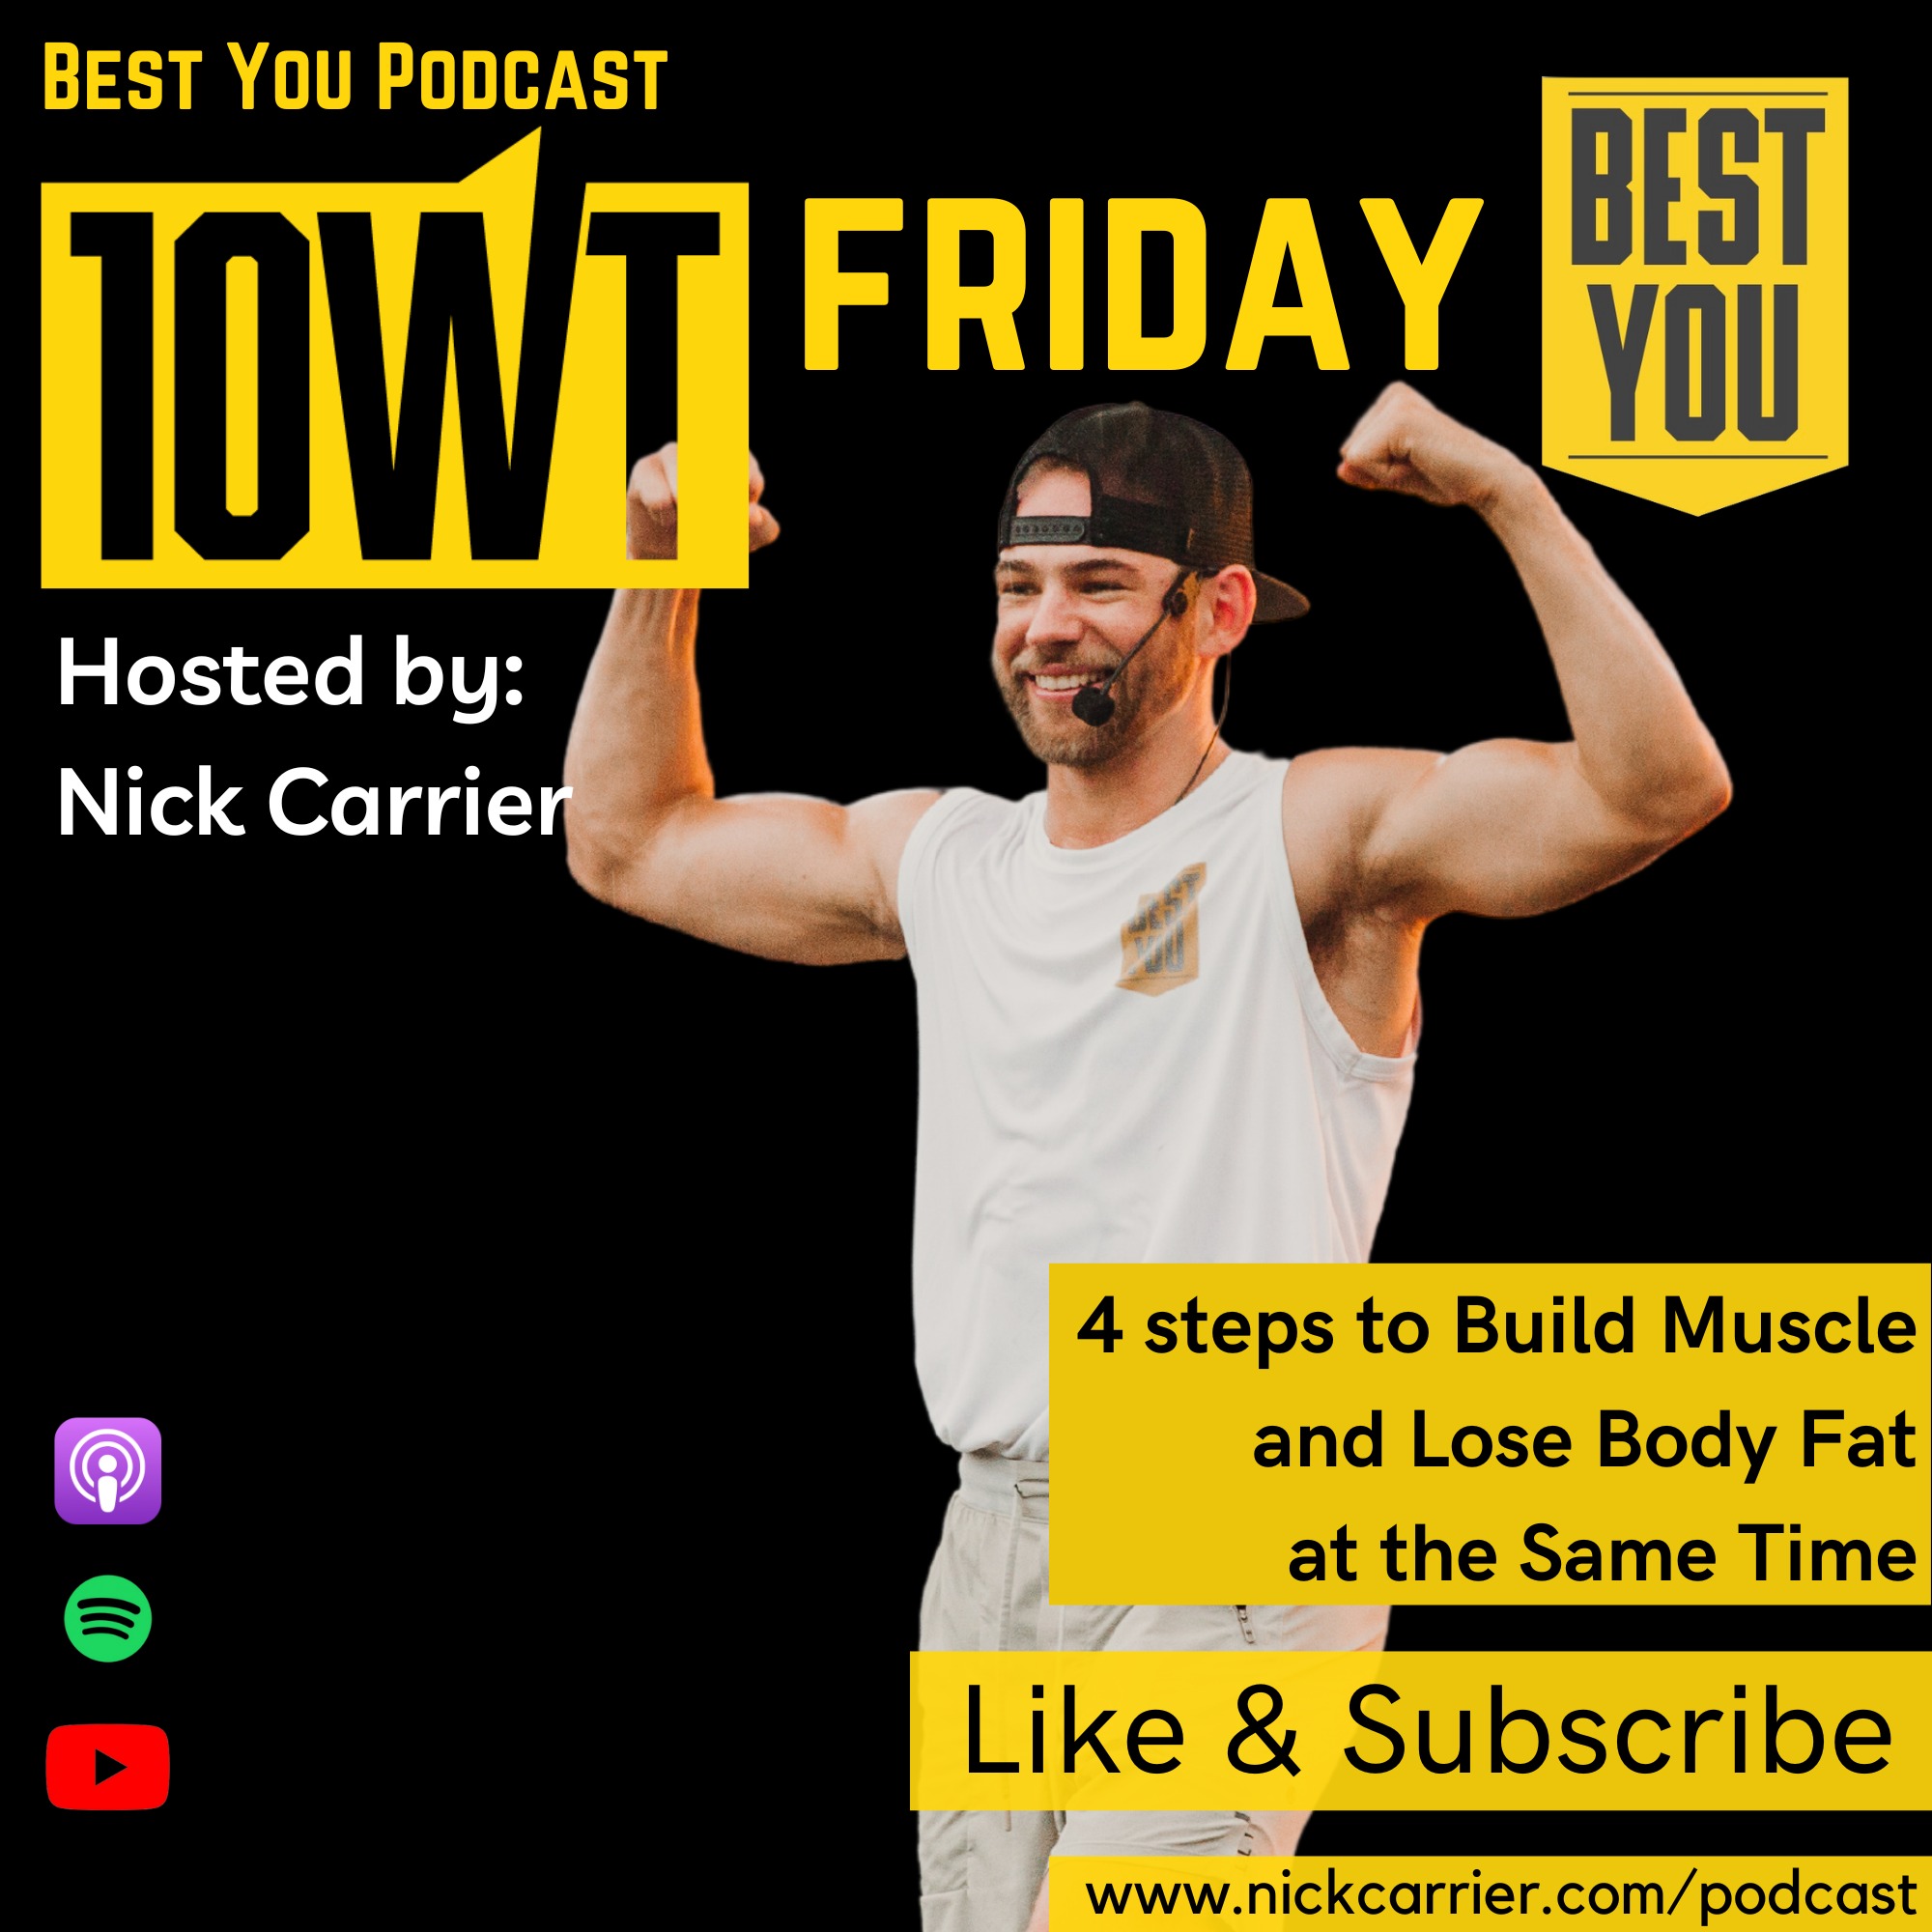 10WT Friday - 4 Steps to Build Muscle and Lose Body Fat at the Same Time